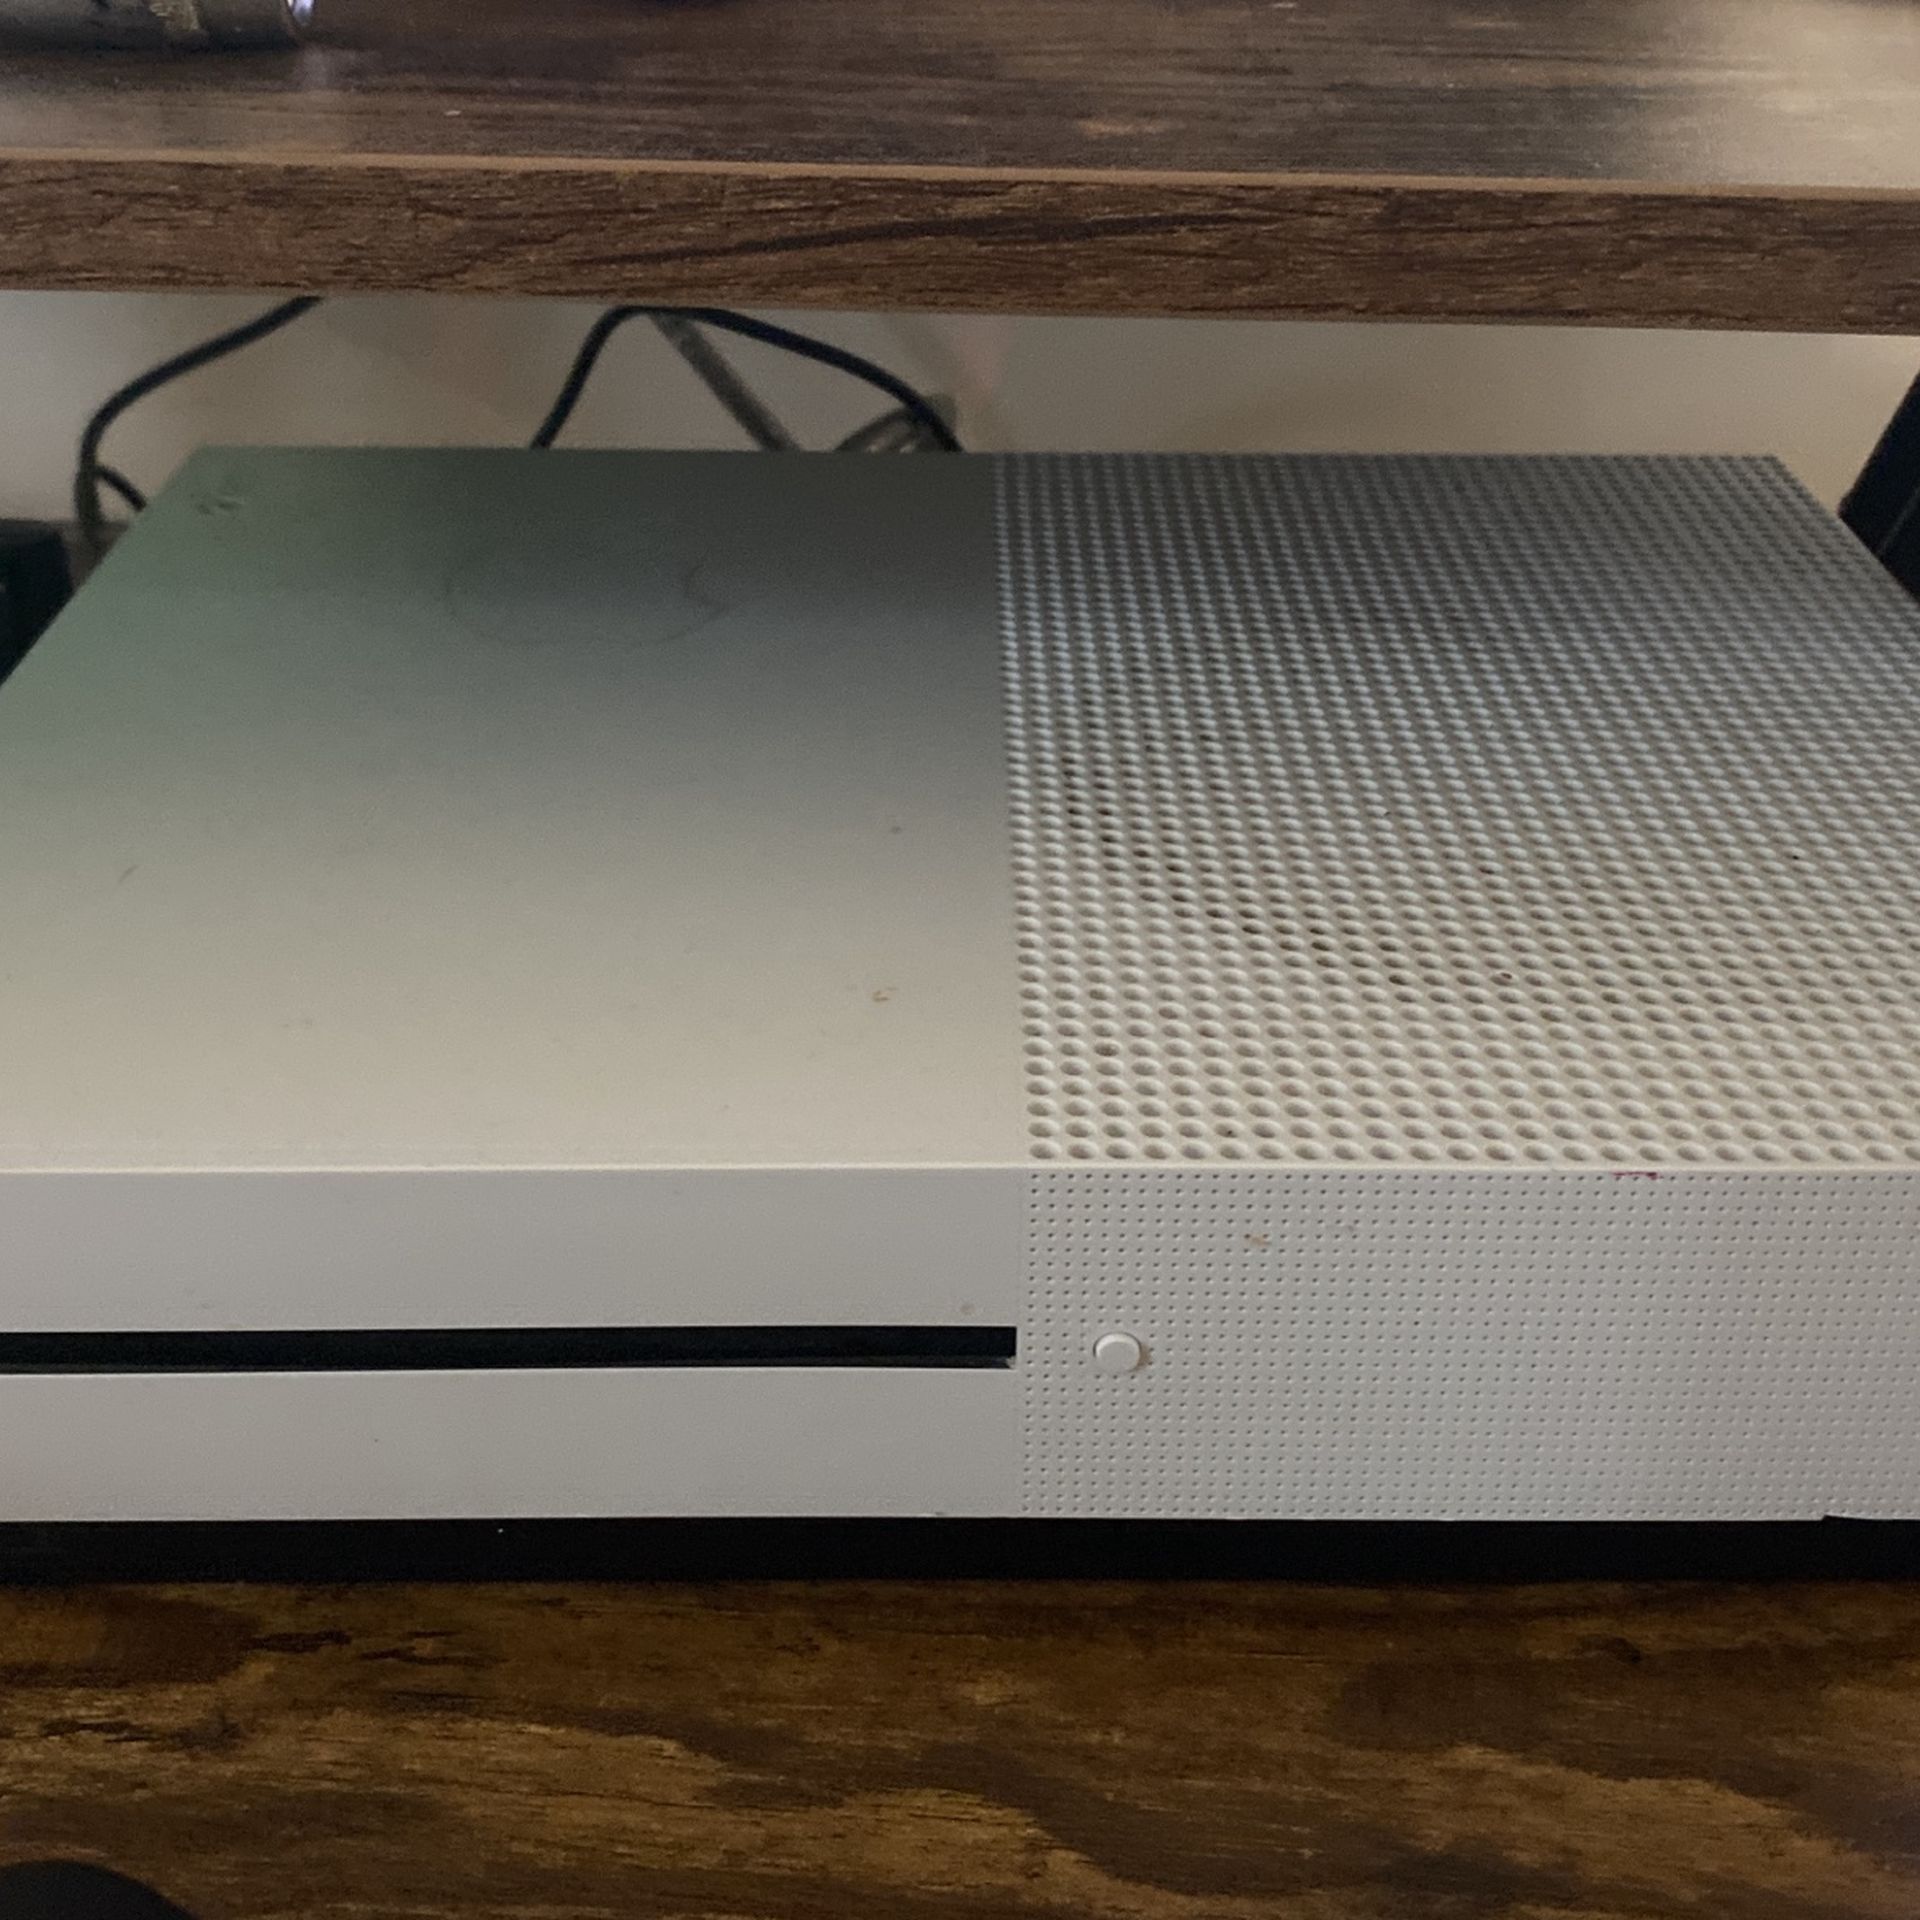 Xbox One S (willing To Do Trades)